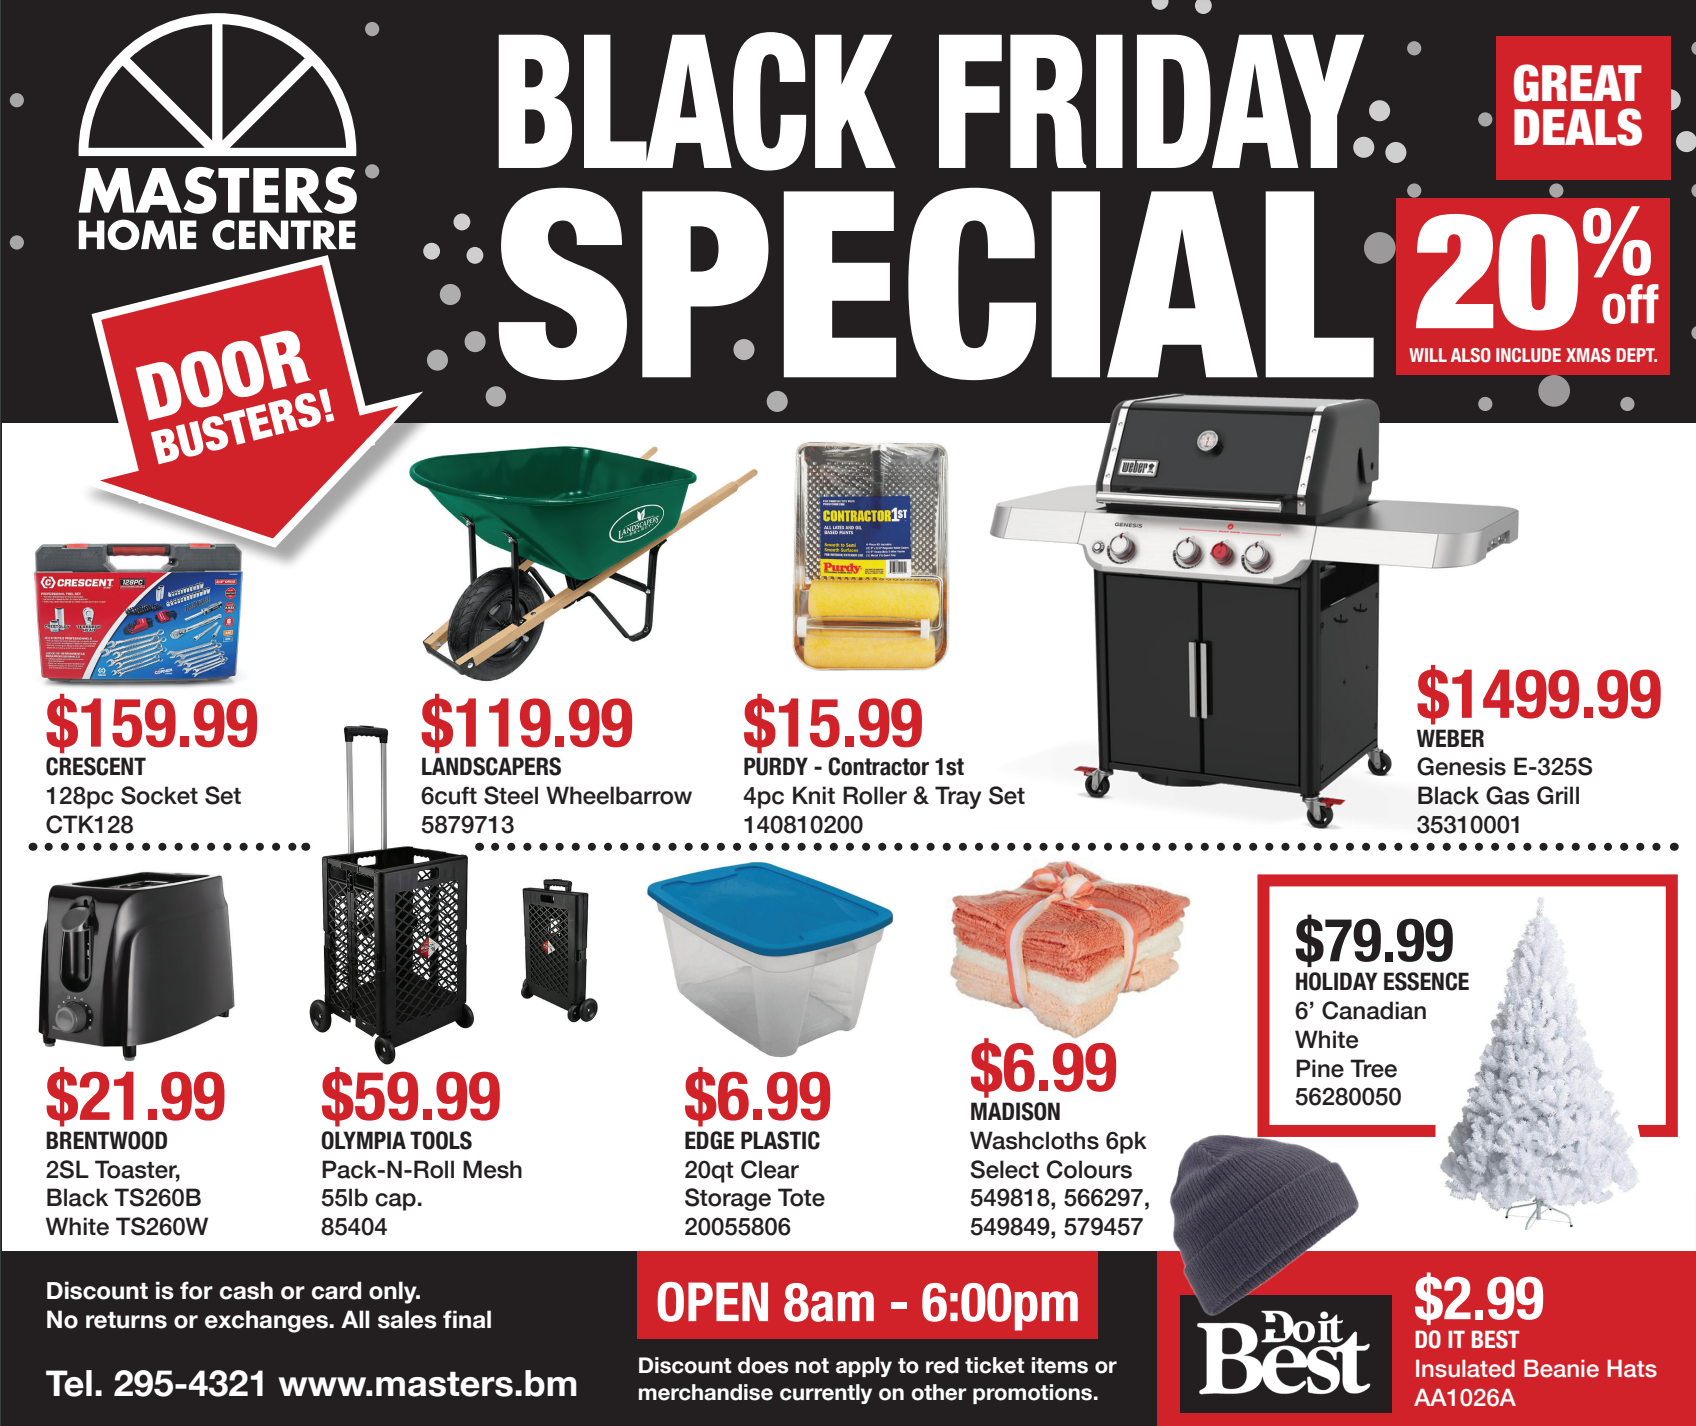 MASTERS HOME CENTRE - BLACK FRIDAY SPECIAL!